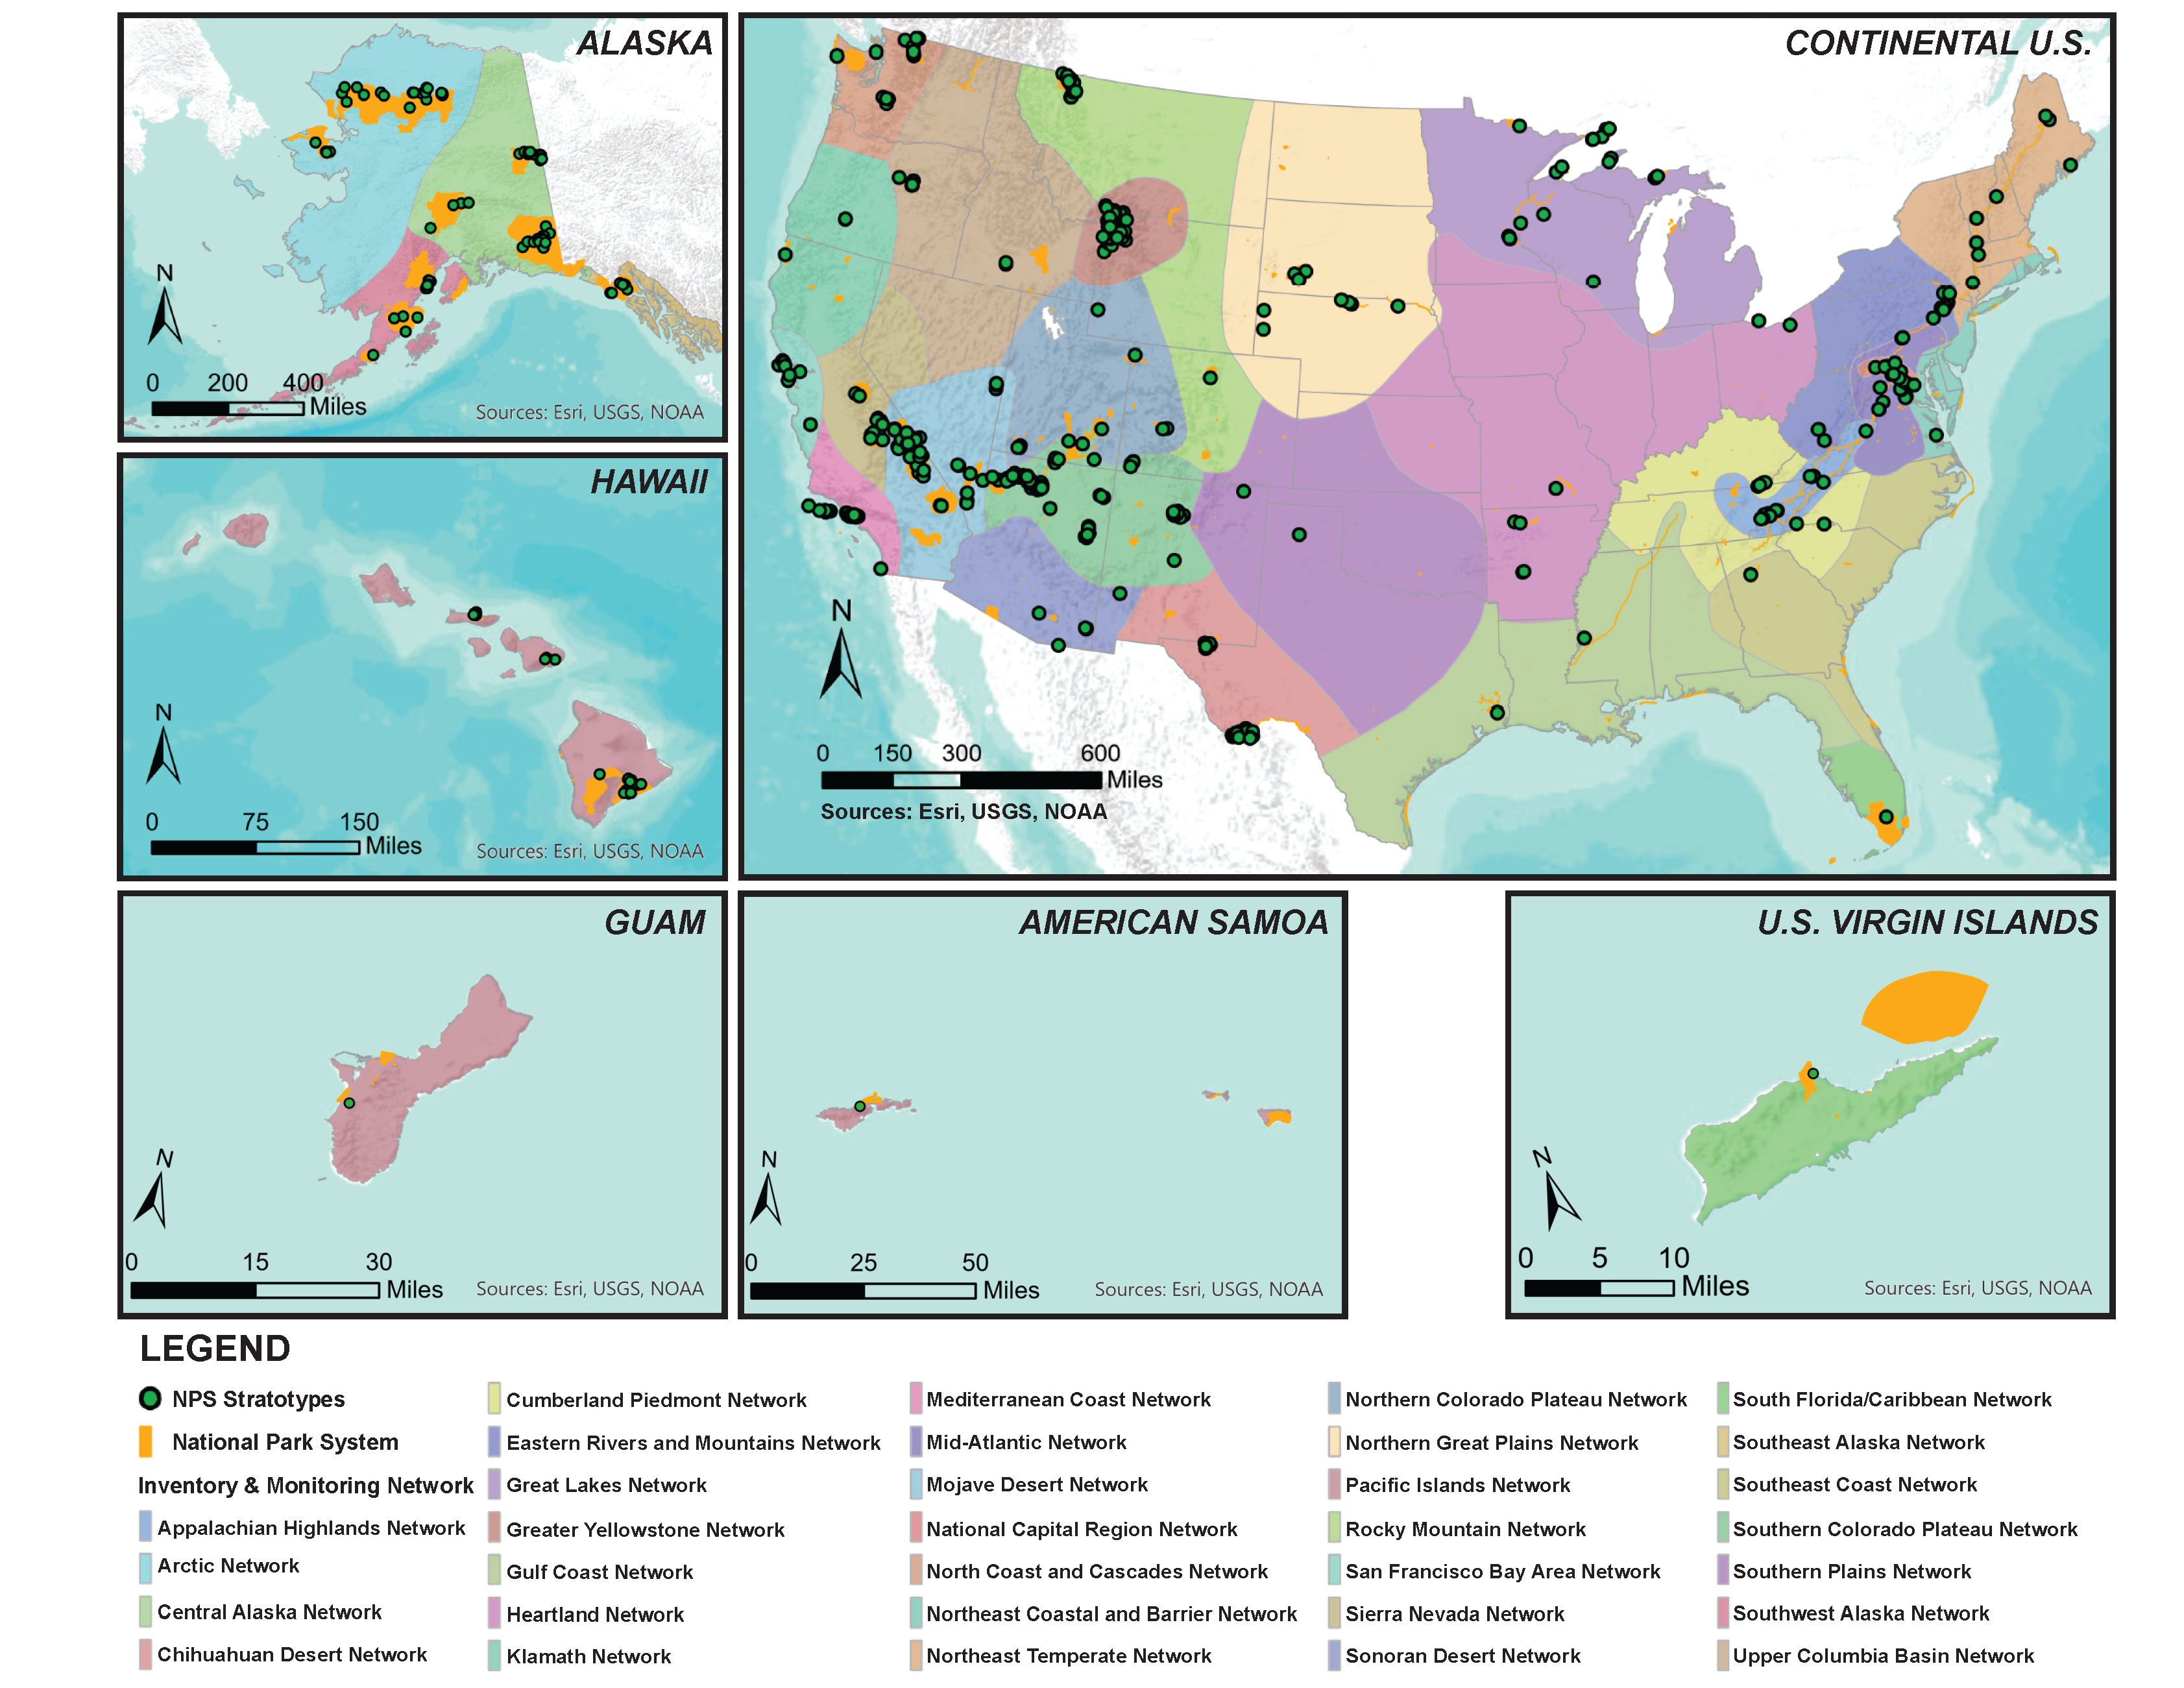 maps of the continental u.s., alaska, hawaii, guan, american samoa, and the u.s. virgin islands with NPS stratotypes marked on maps with overlays of national parks and inventory and monitoring networks